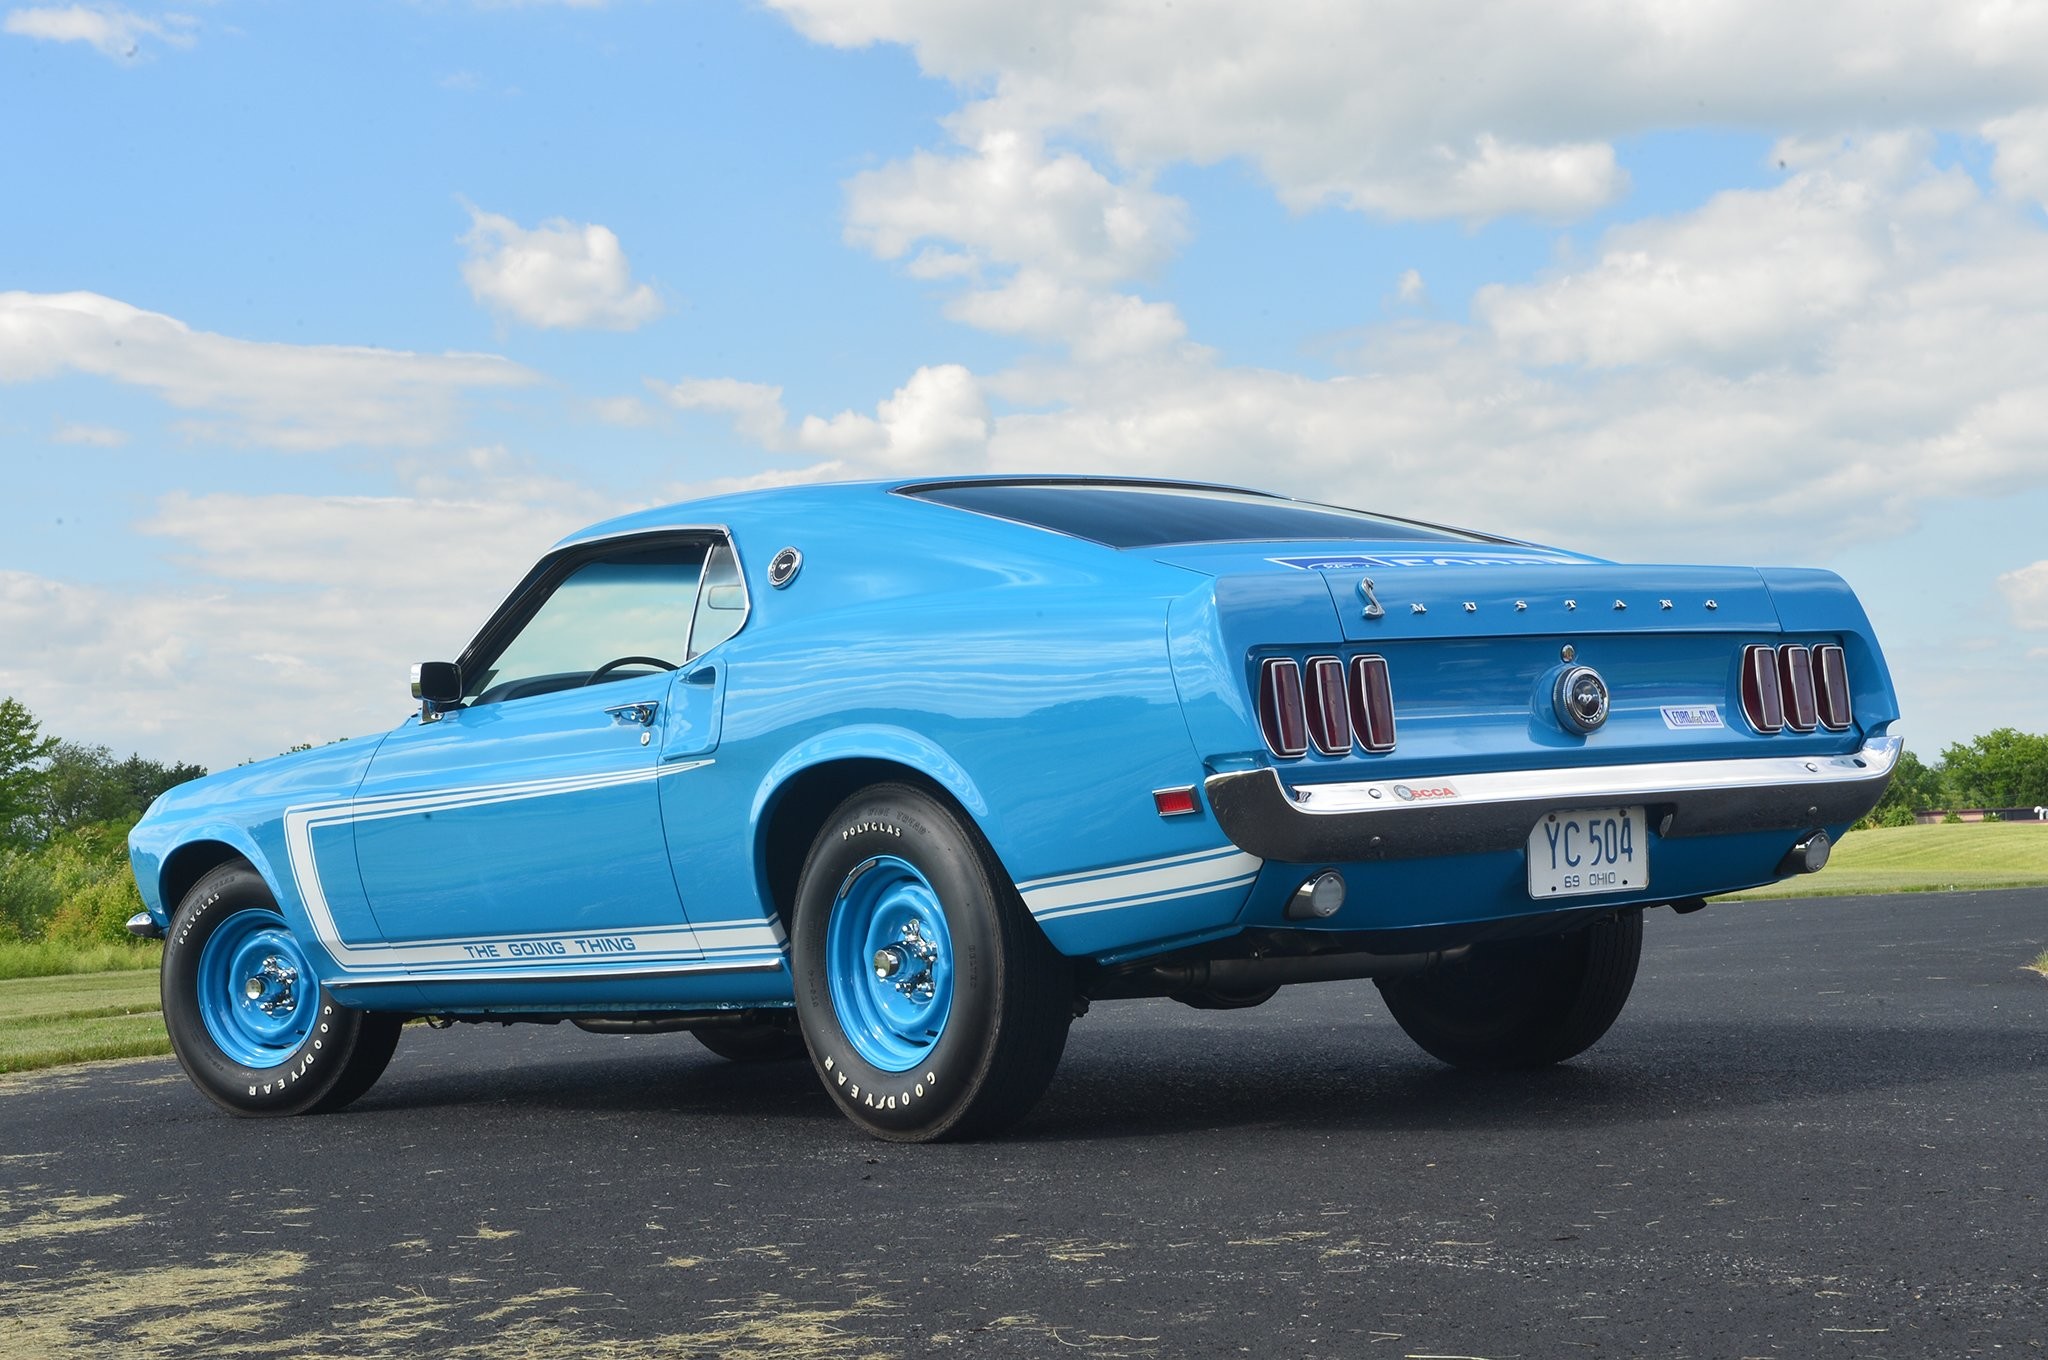 2048x1360 In Charlie Crouch purchased a "Special Promotion" 1969 Ford Mustang  Sportsroof which was the first of a series of special edition Mustangs.